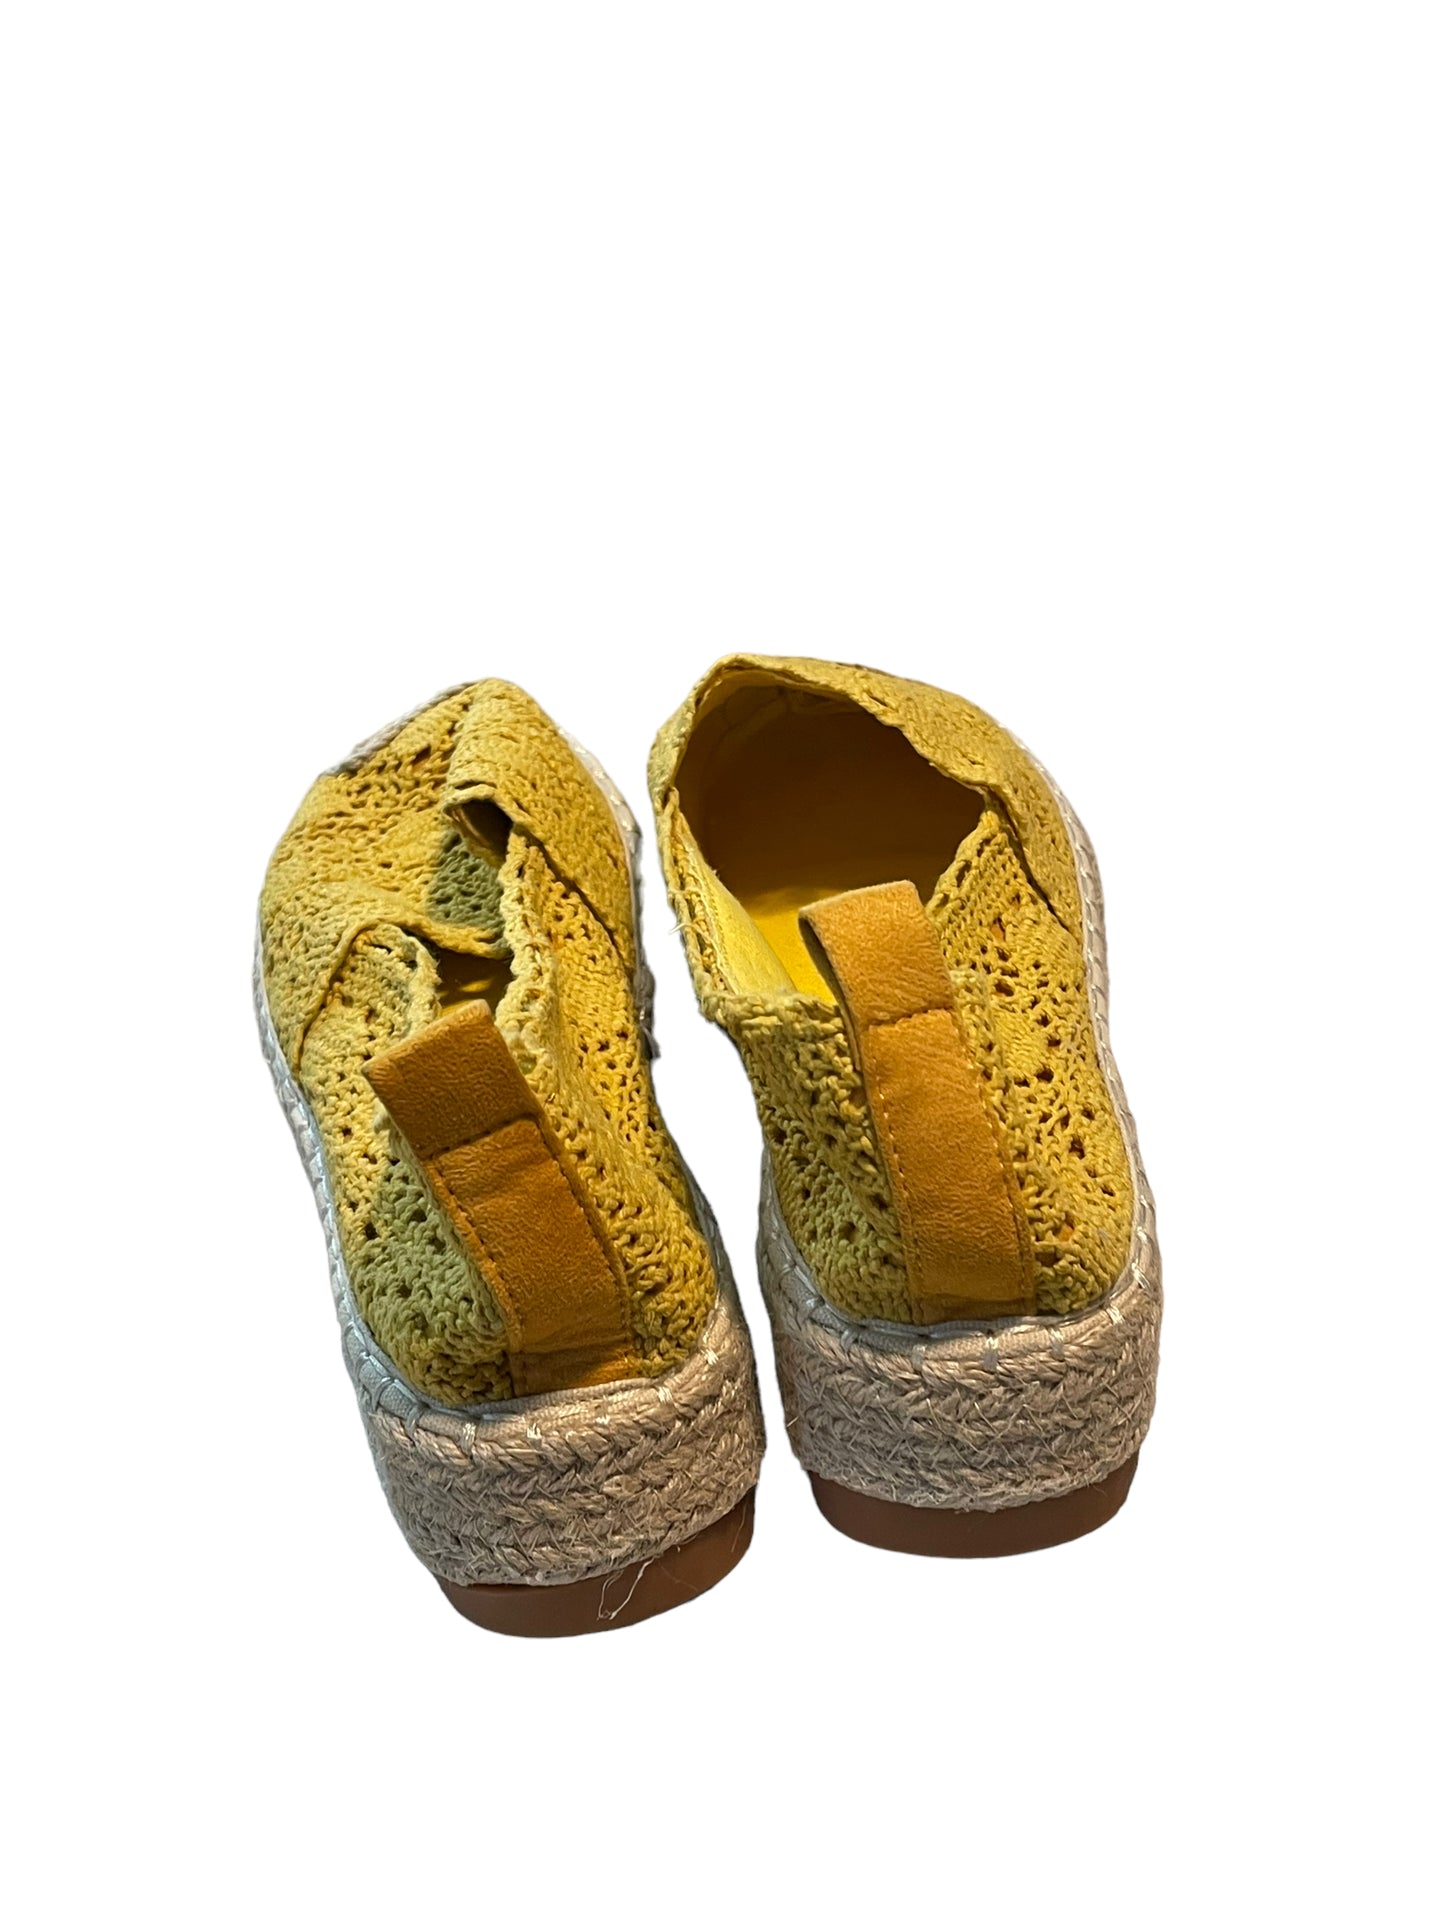 Glam & Co Yellow Crochet Shoes